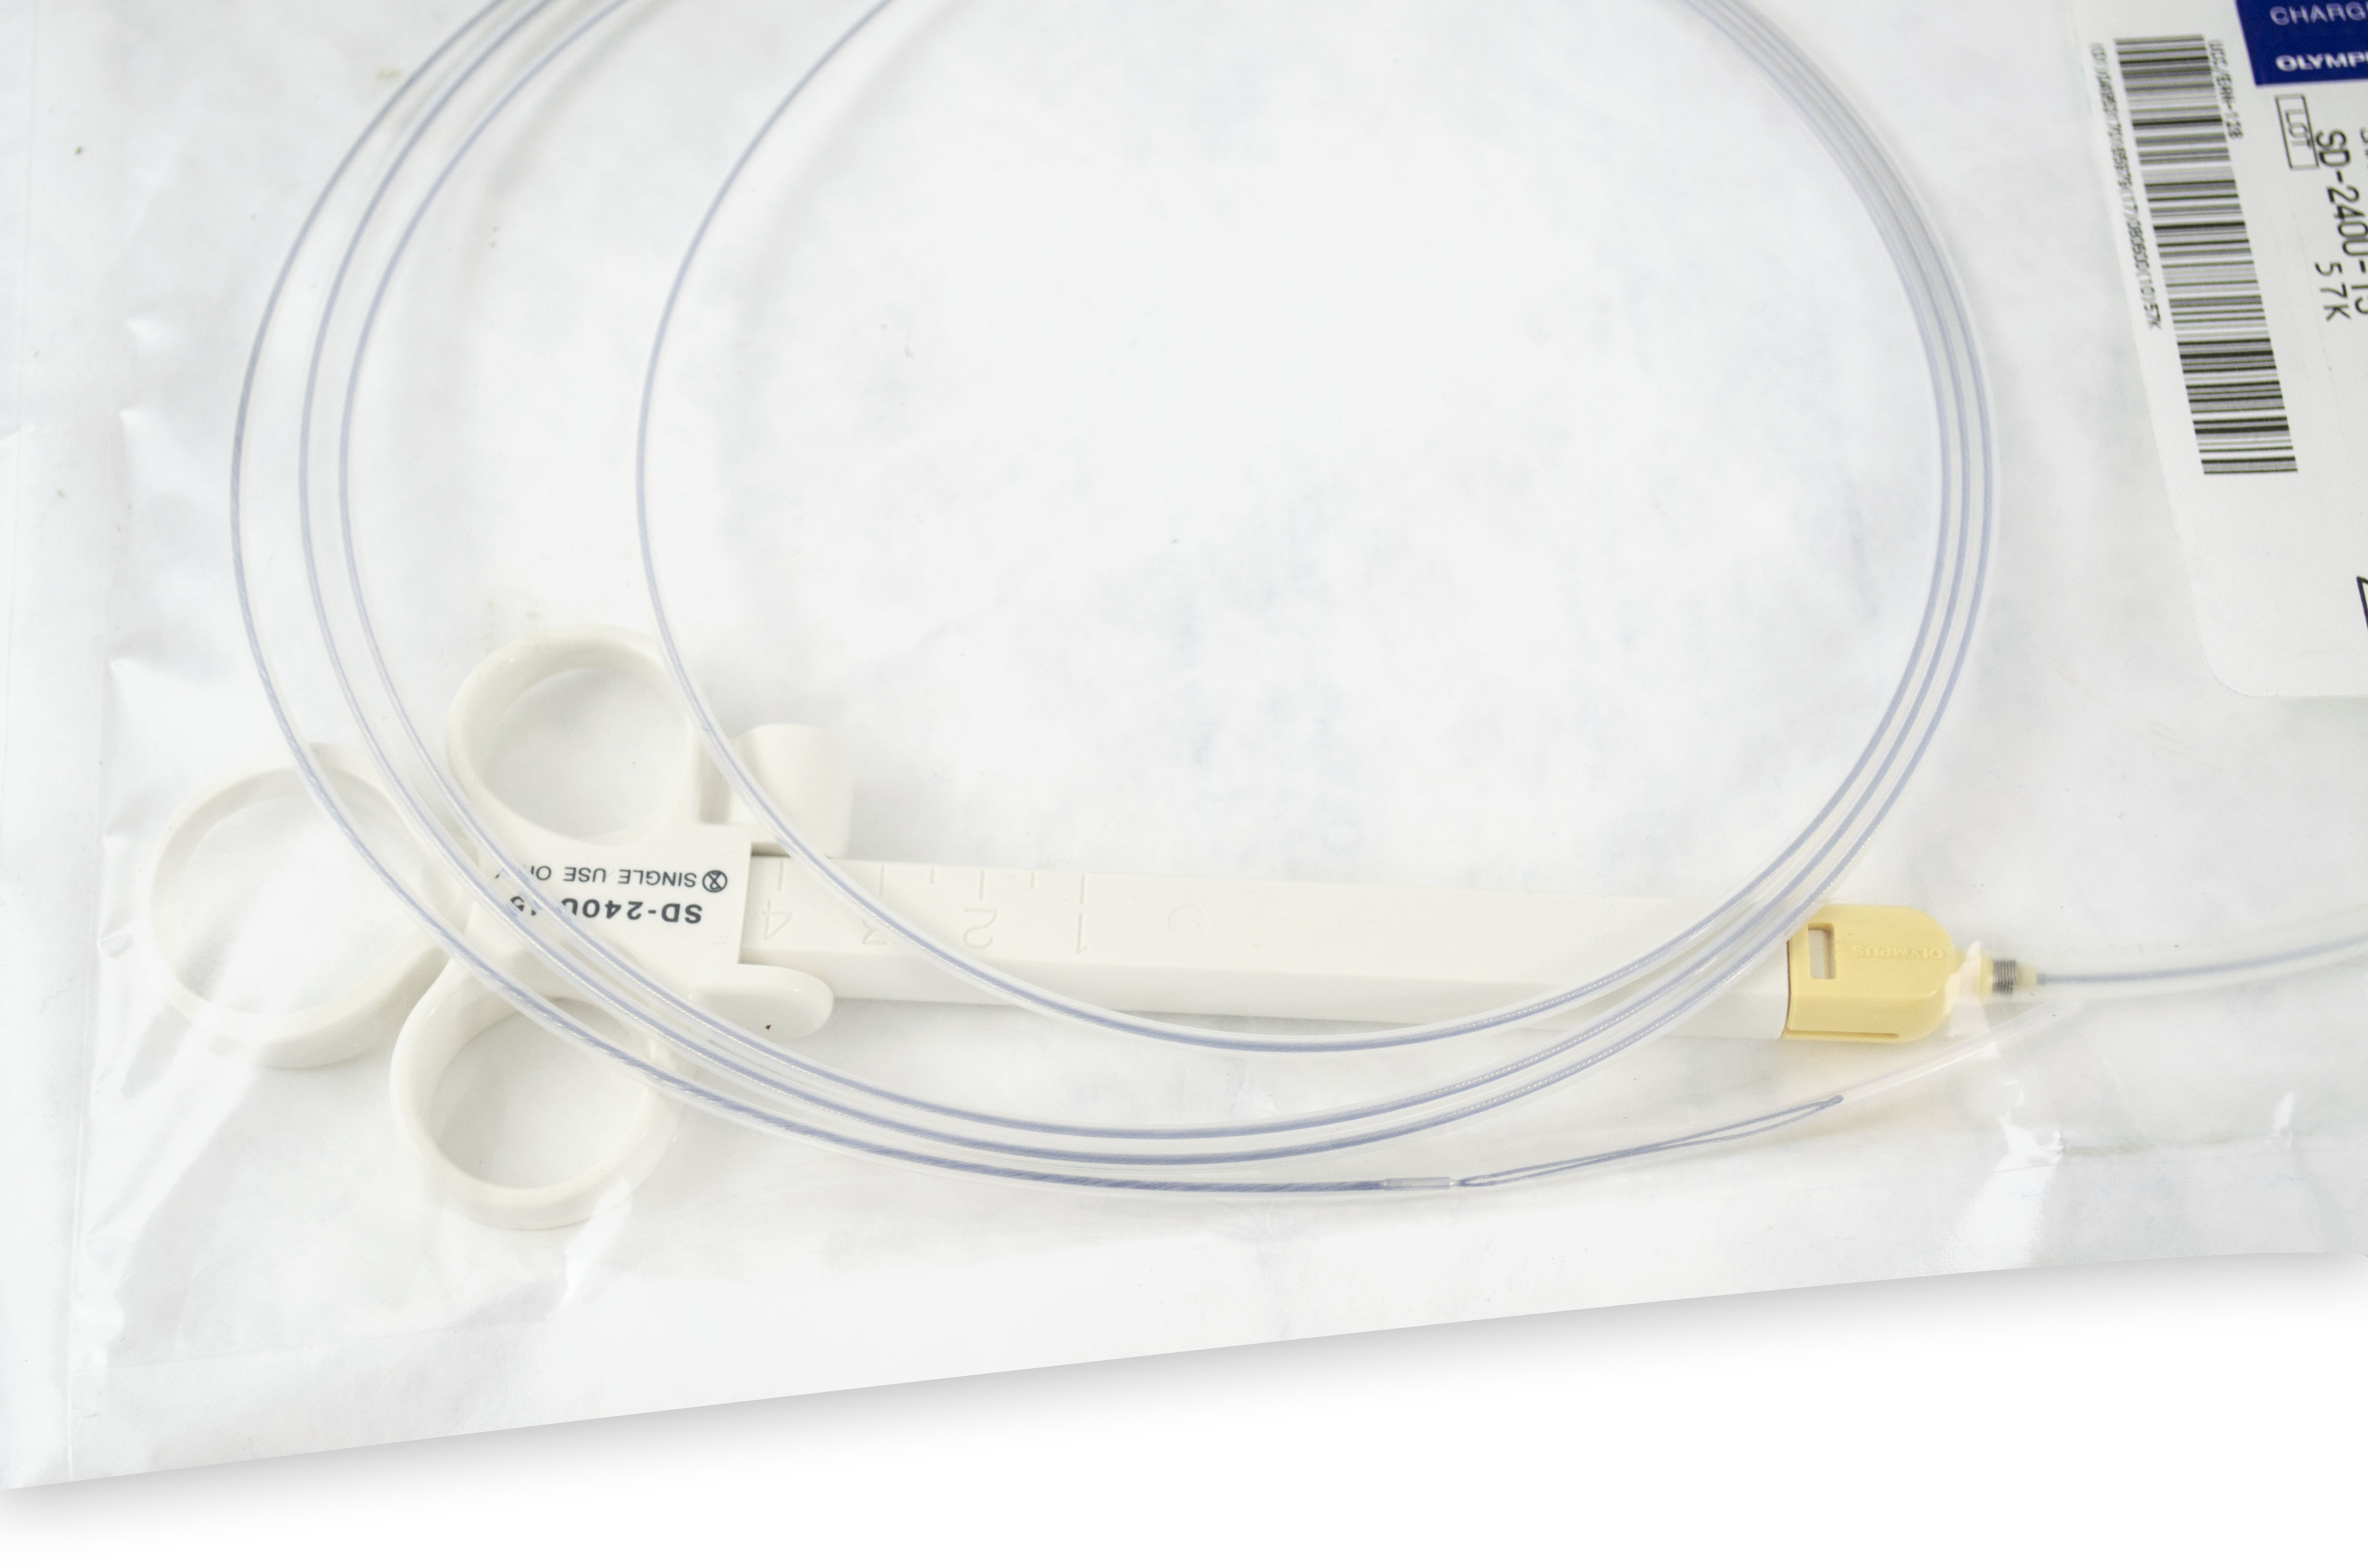 [Out-of-Date] Olympus DIsposable Diathermy Snare - SD-240U-15